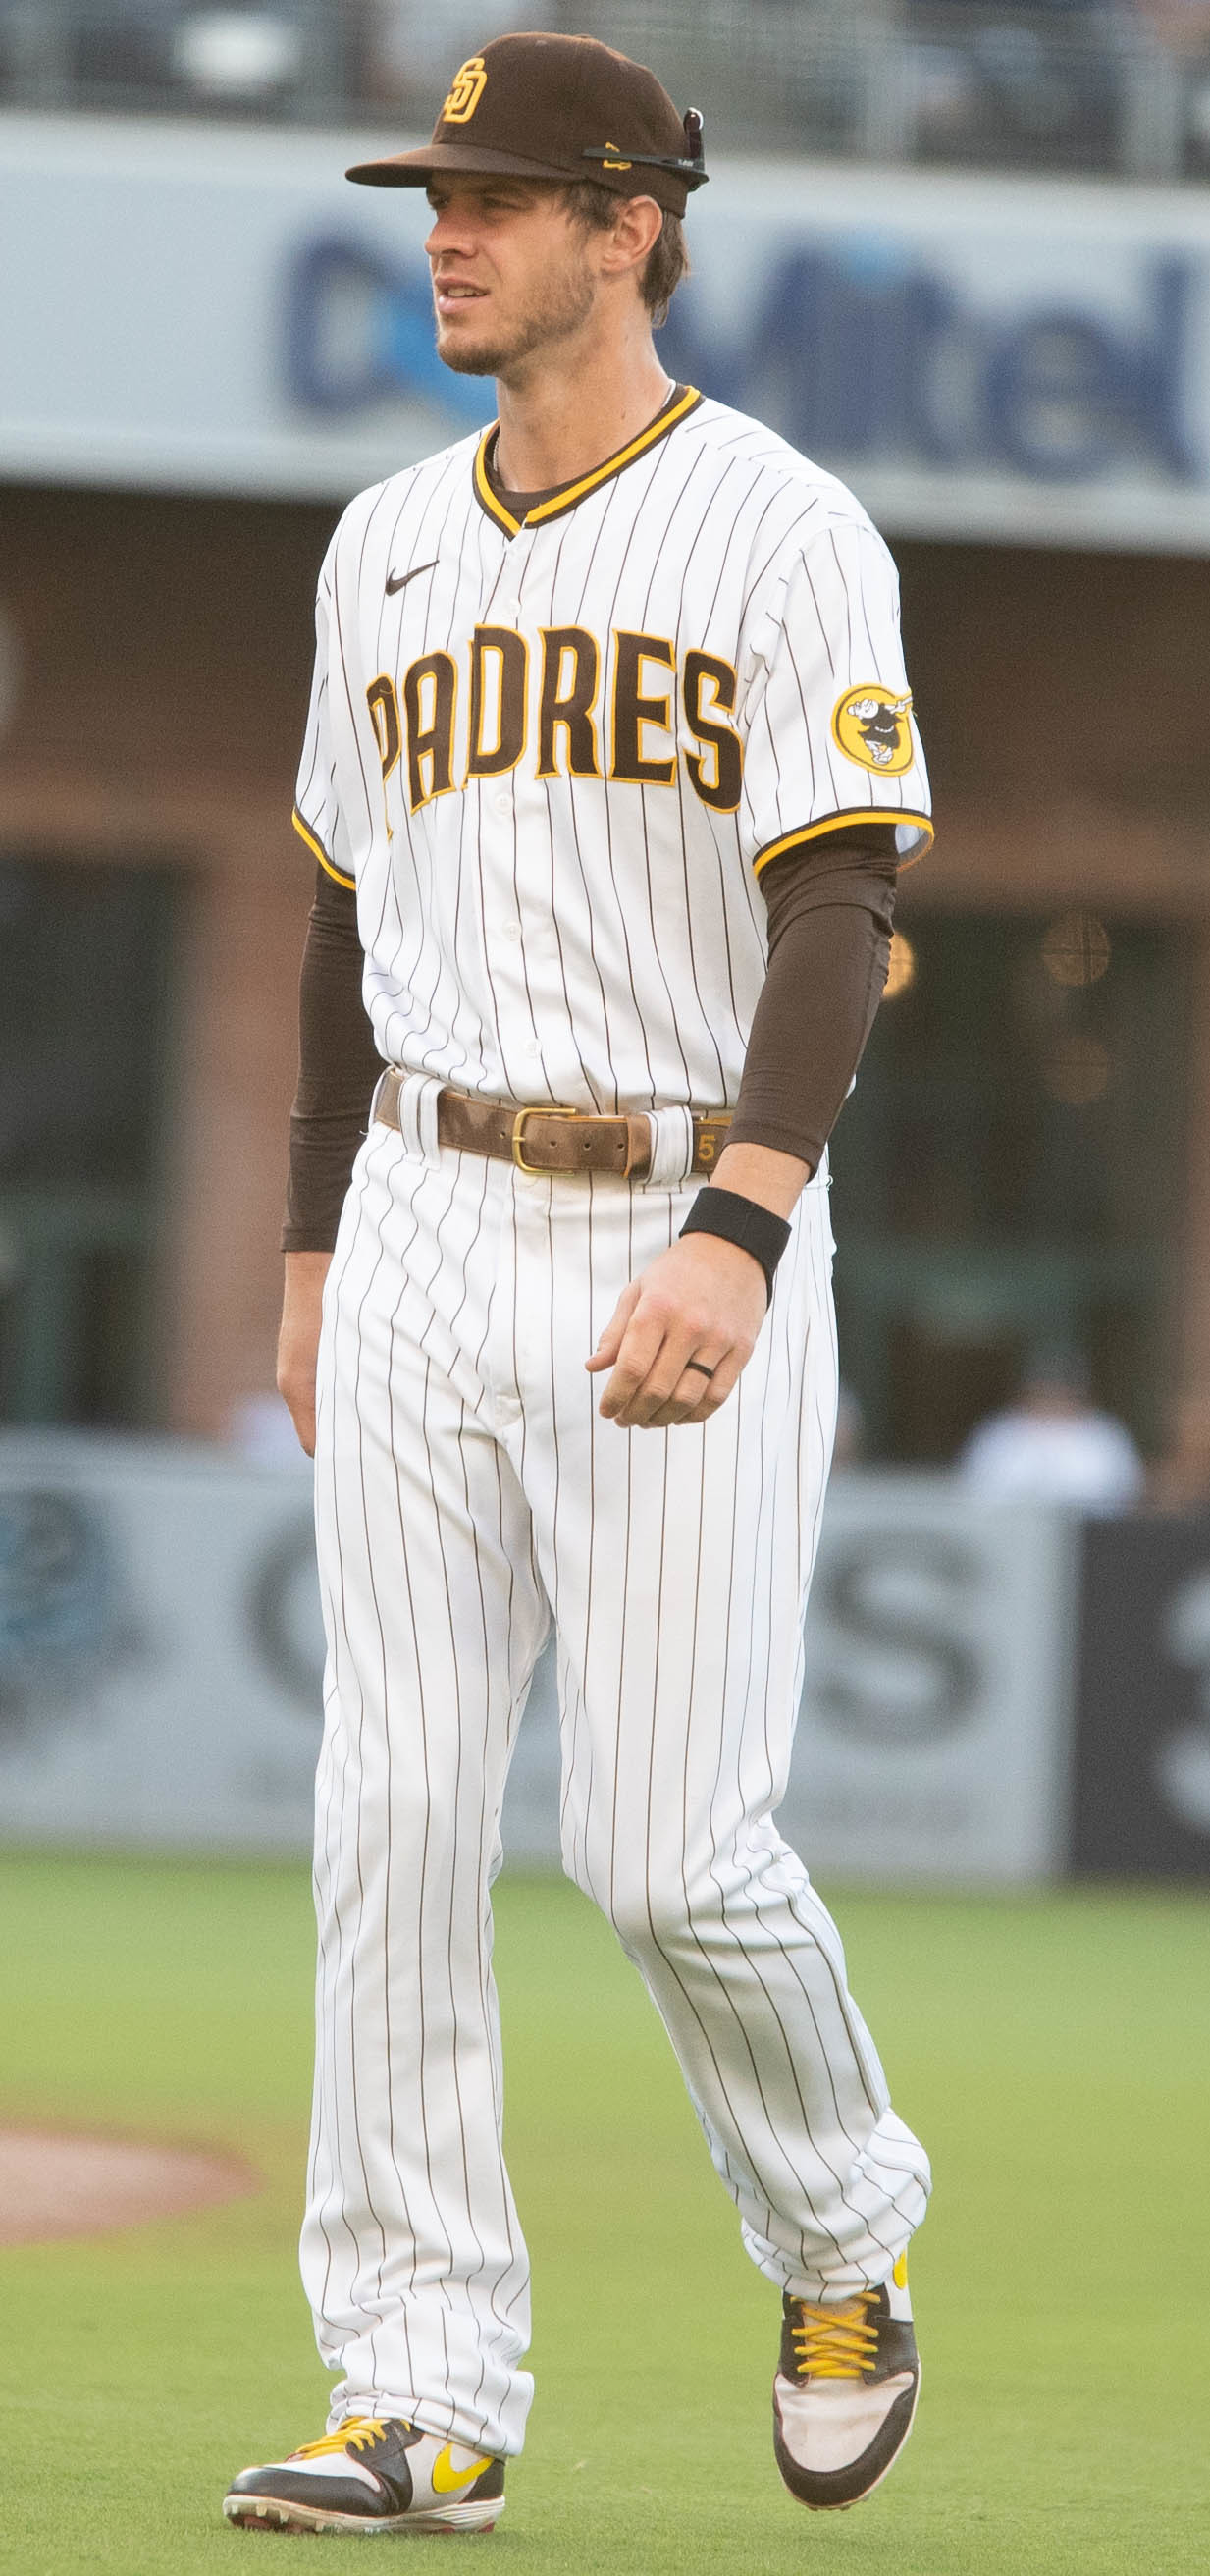 padres wil myers jersey